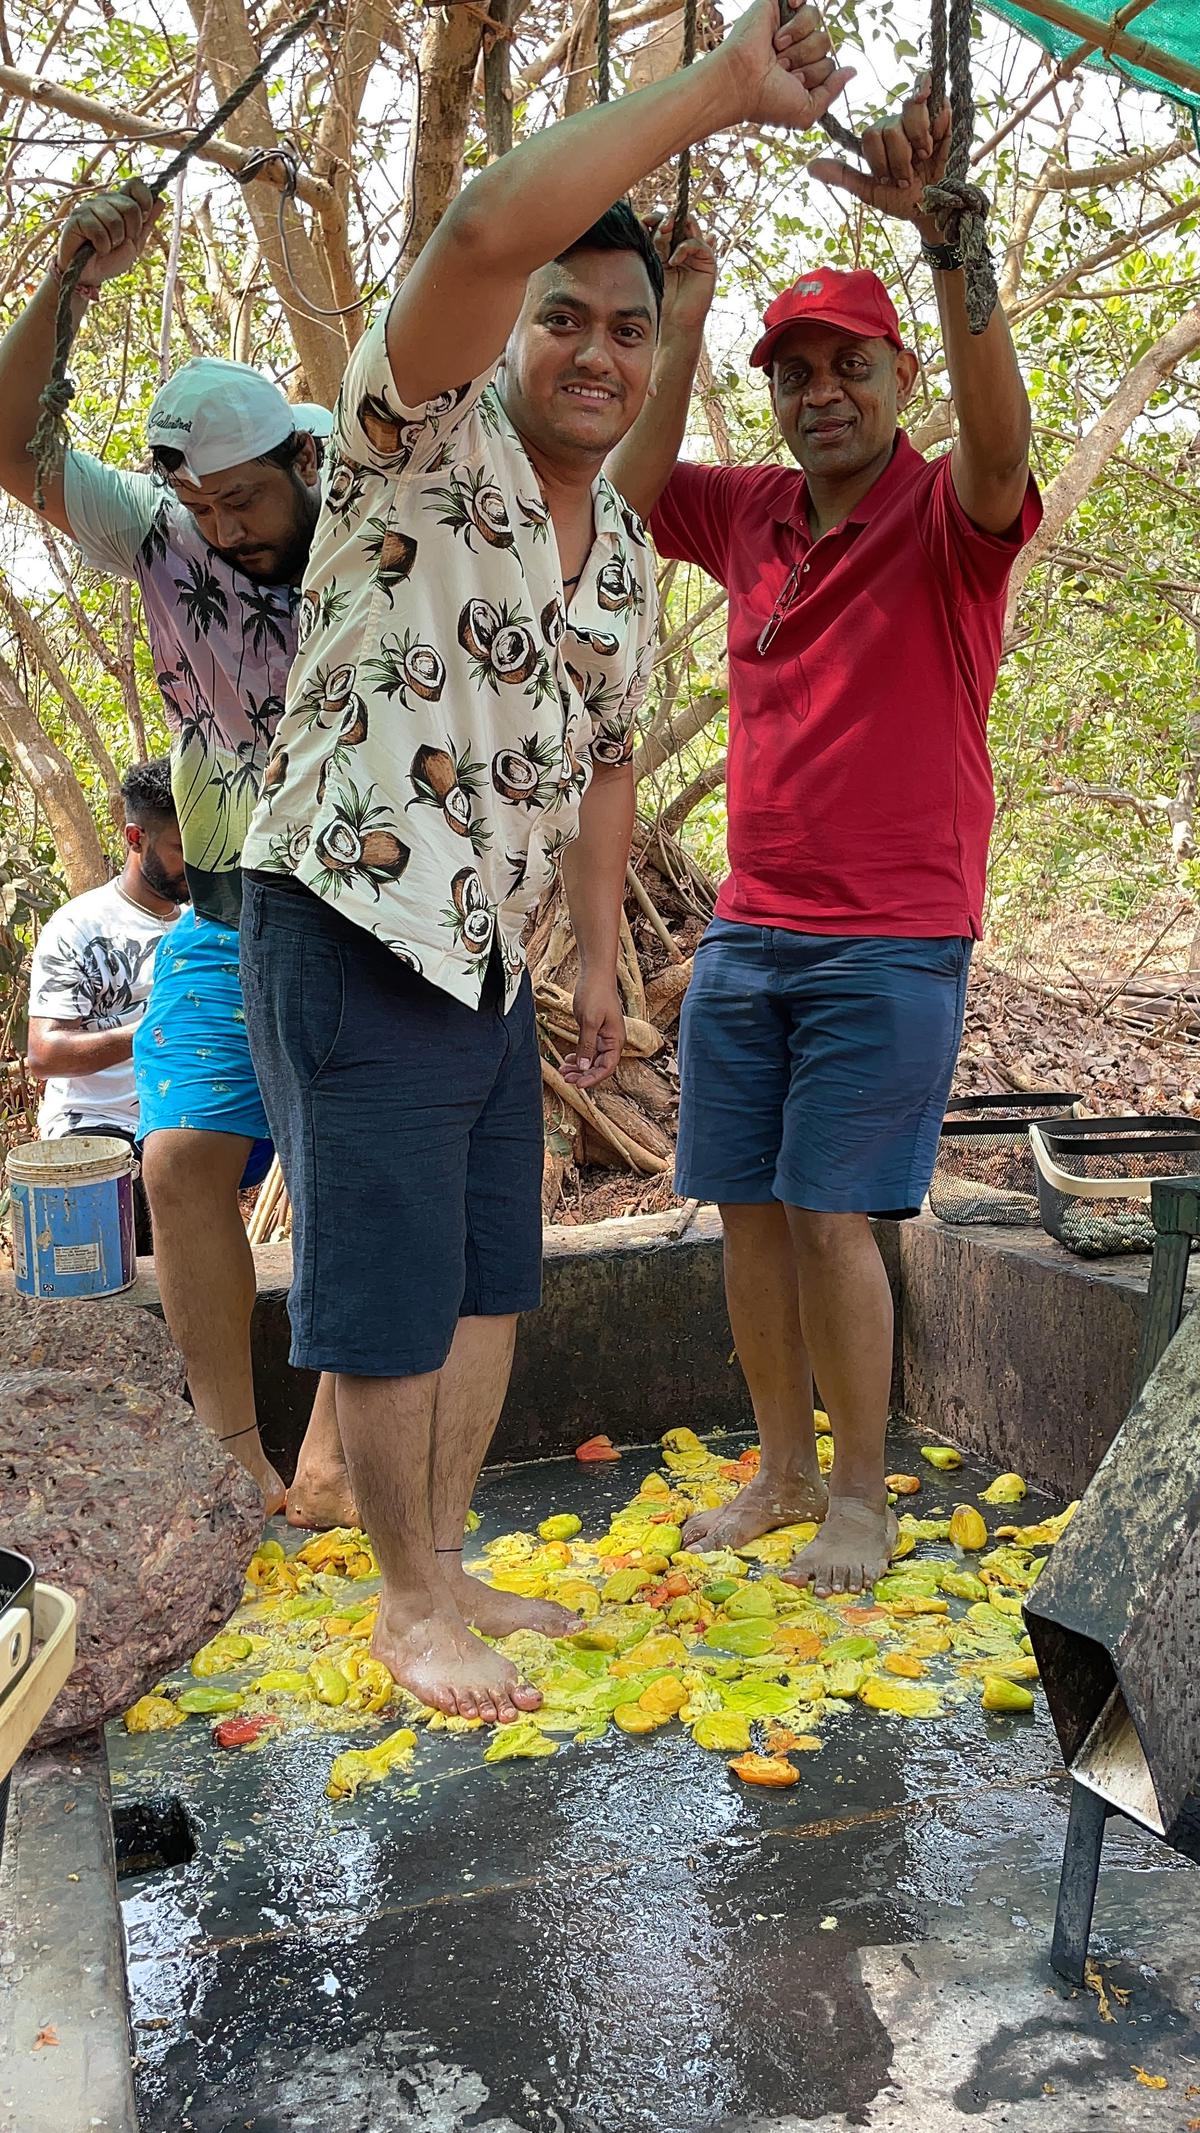 The writer (in the red tee) stomping cashew fruits